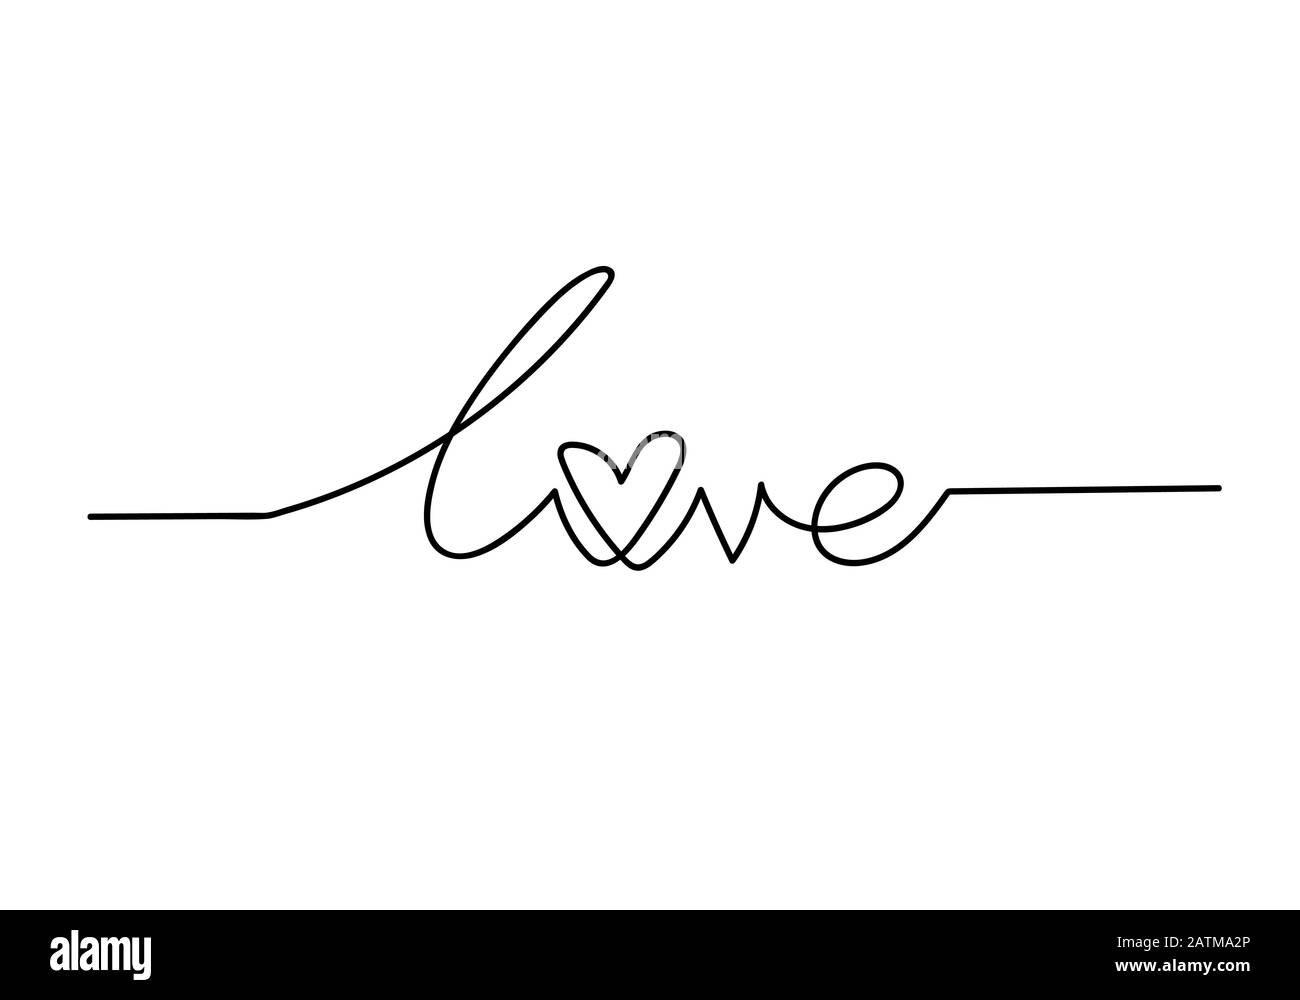 Continuous One Line Drawing Of Word Love Vector Minimalist Black And White Illustration Of Love Valentine Concept Stock Photo Alamy